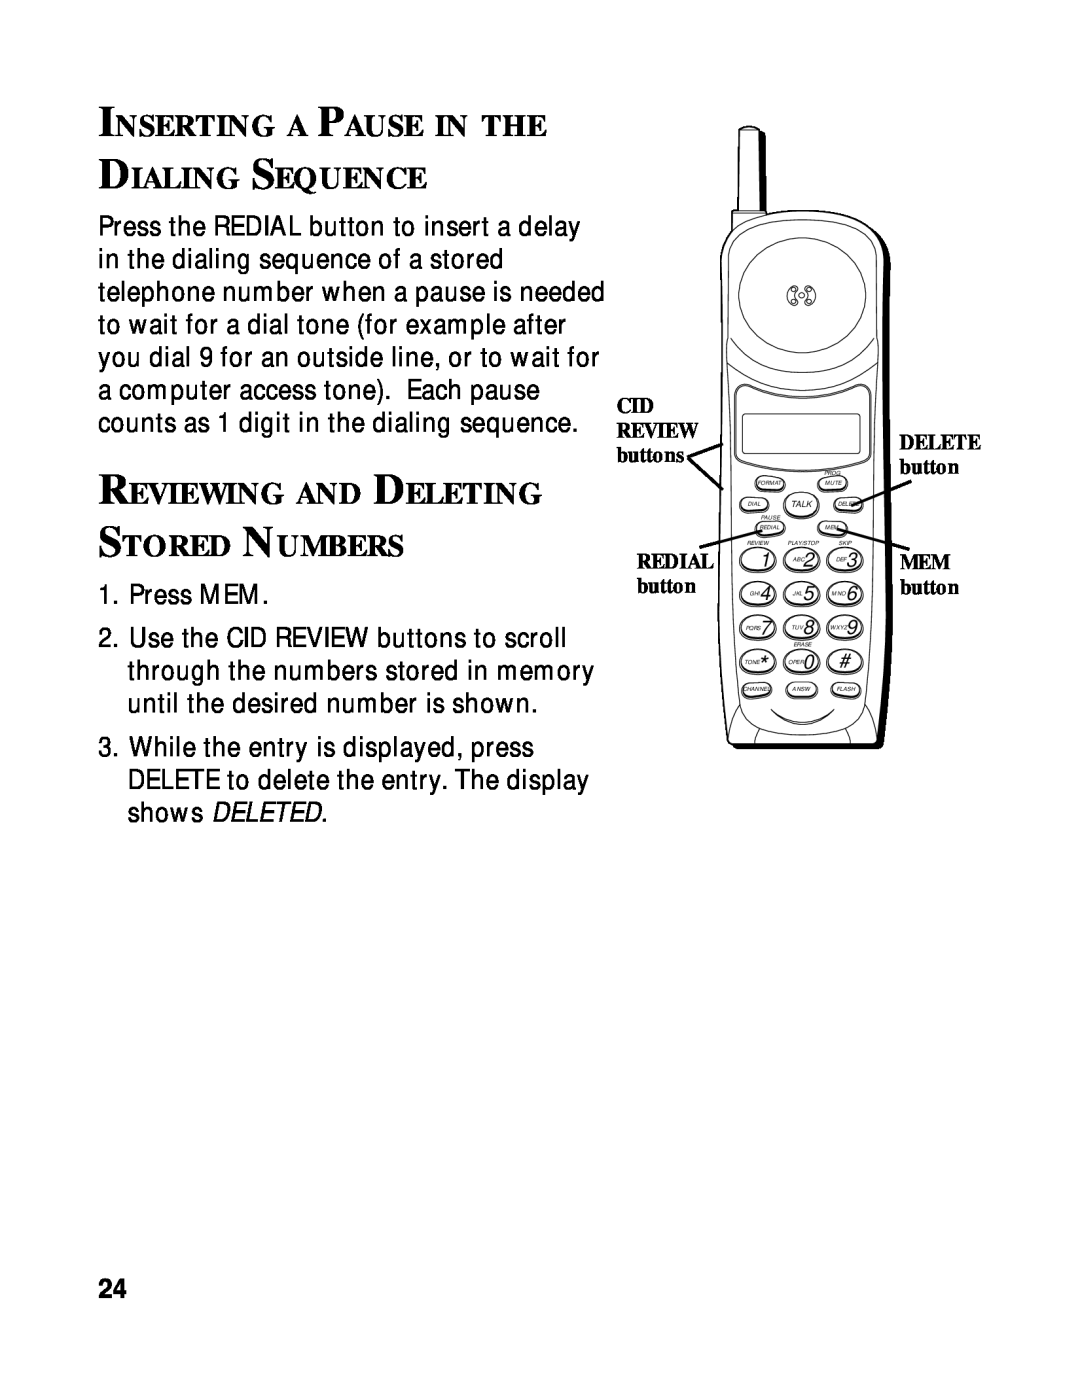 RCA 900 MHz manual Inserting A Pause In The Dialing Sequence, Reviewing And Deleting, Stored Numbers, Press MEM 